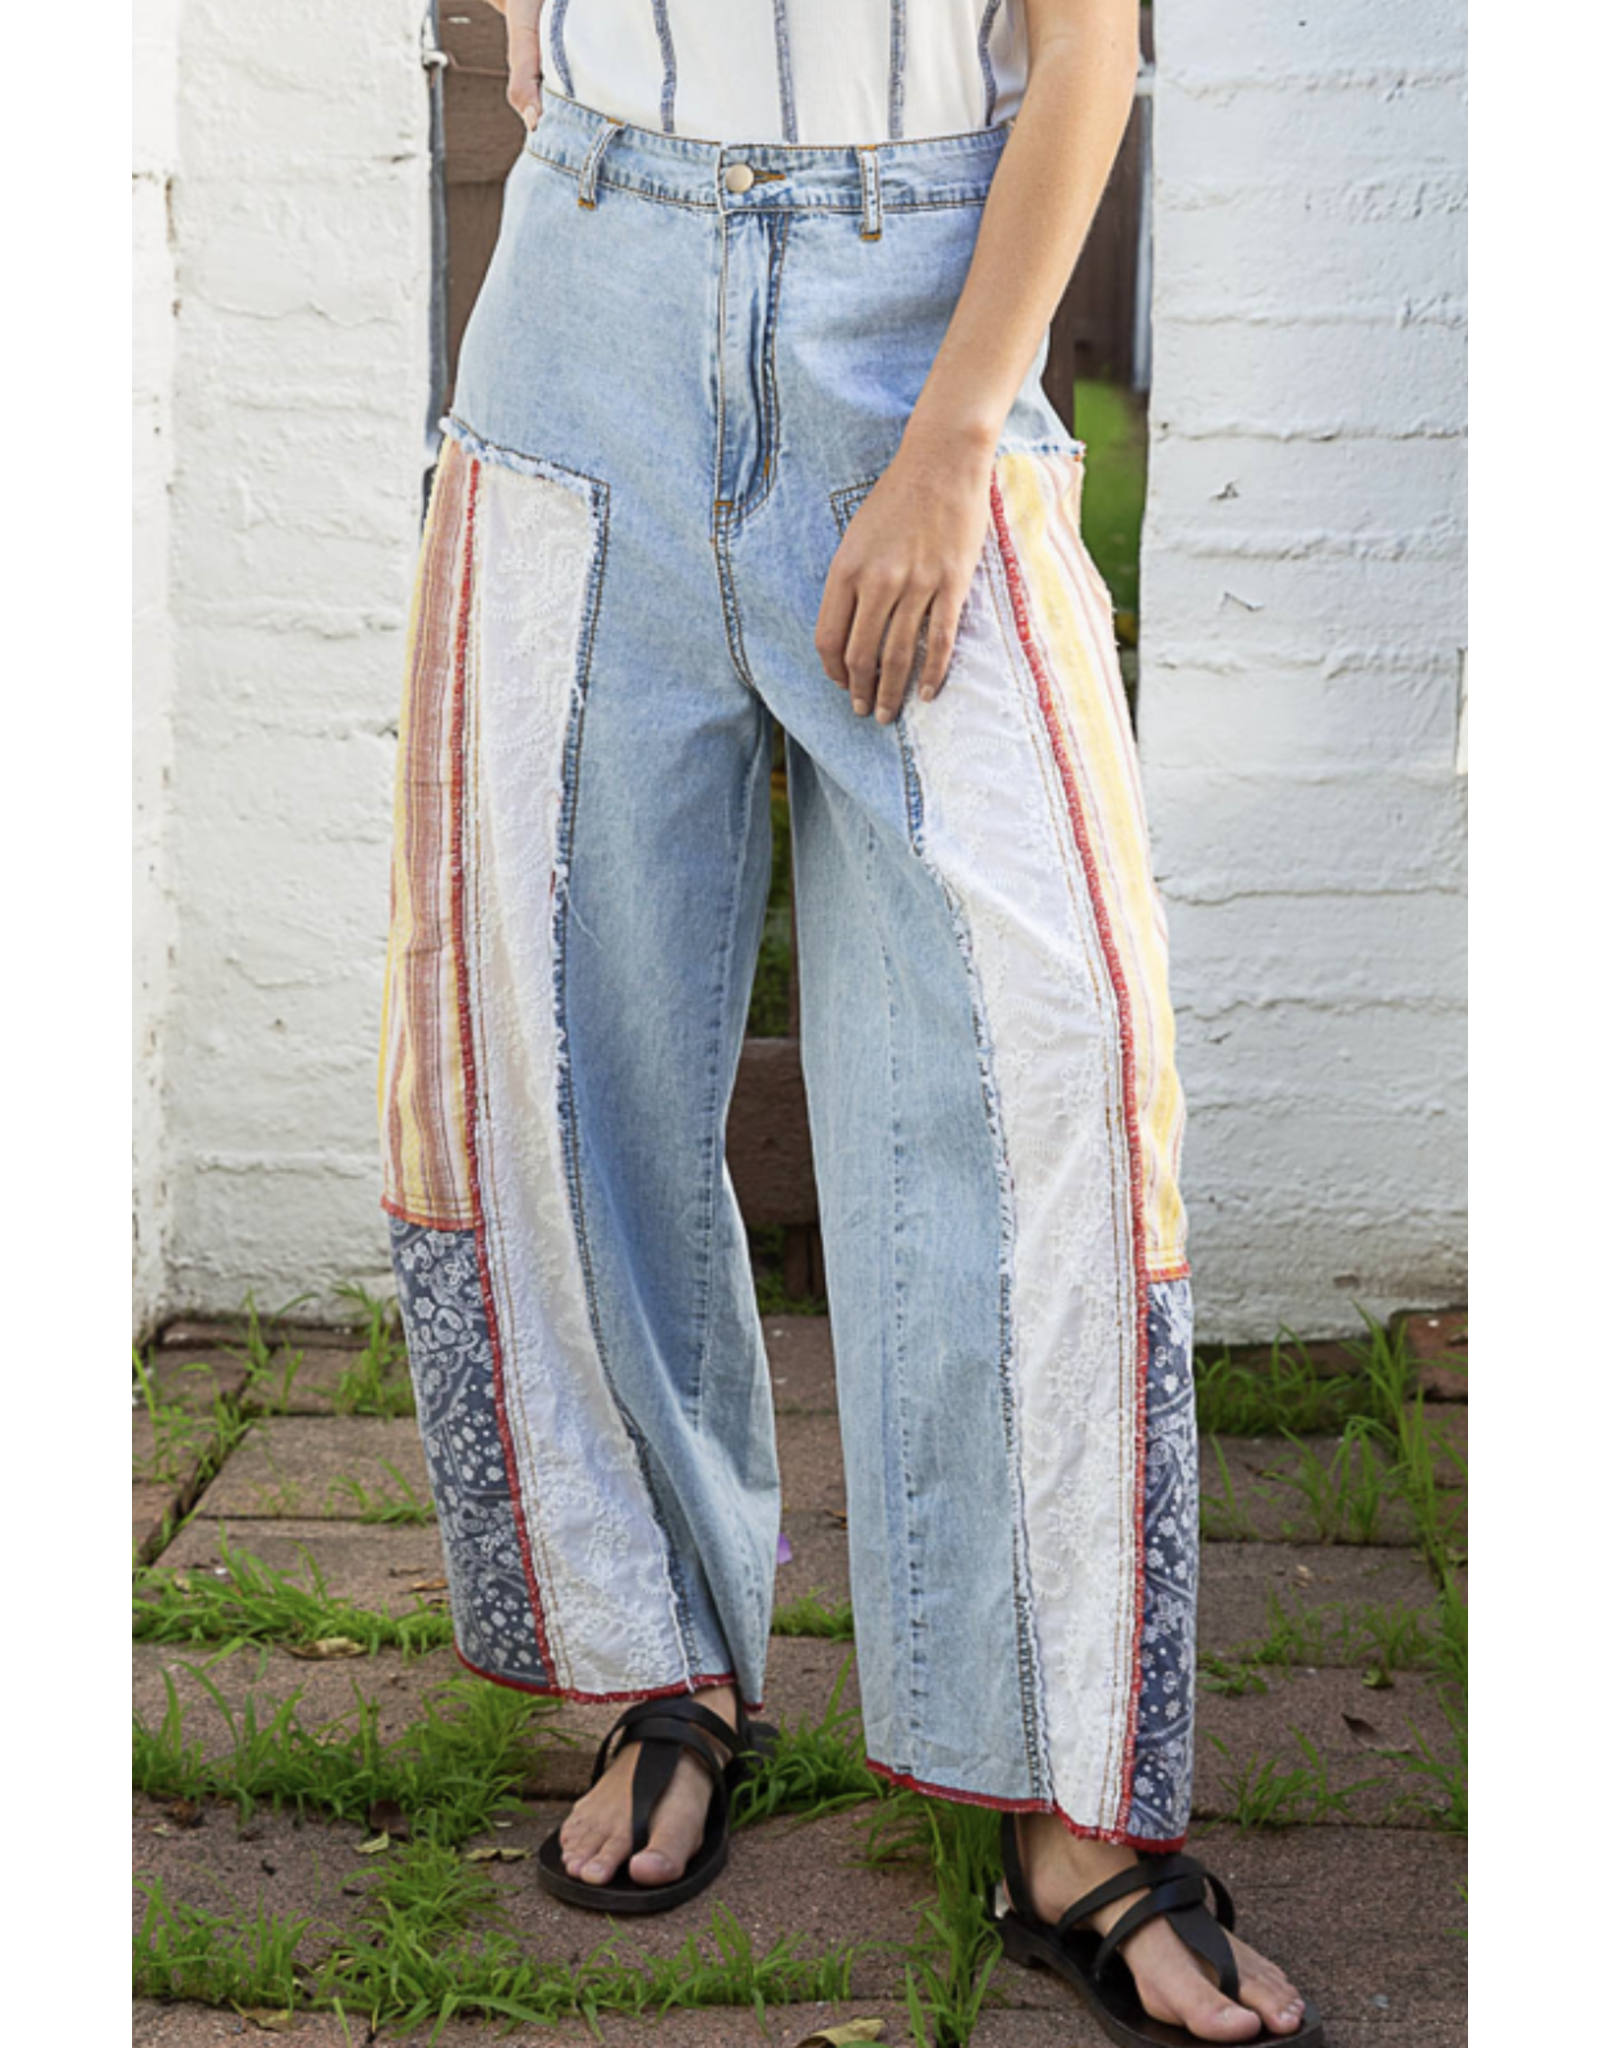 POL Jess - Wide leg jeans with long patches